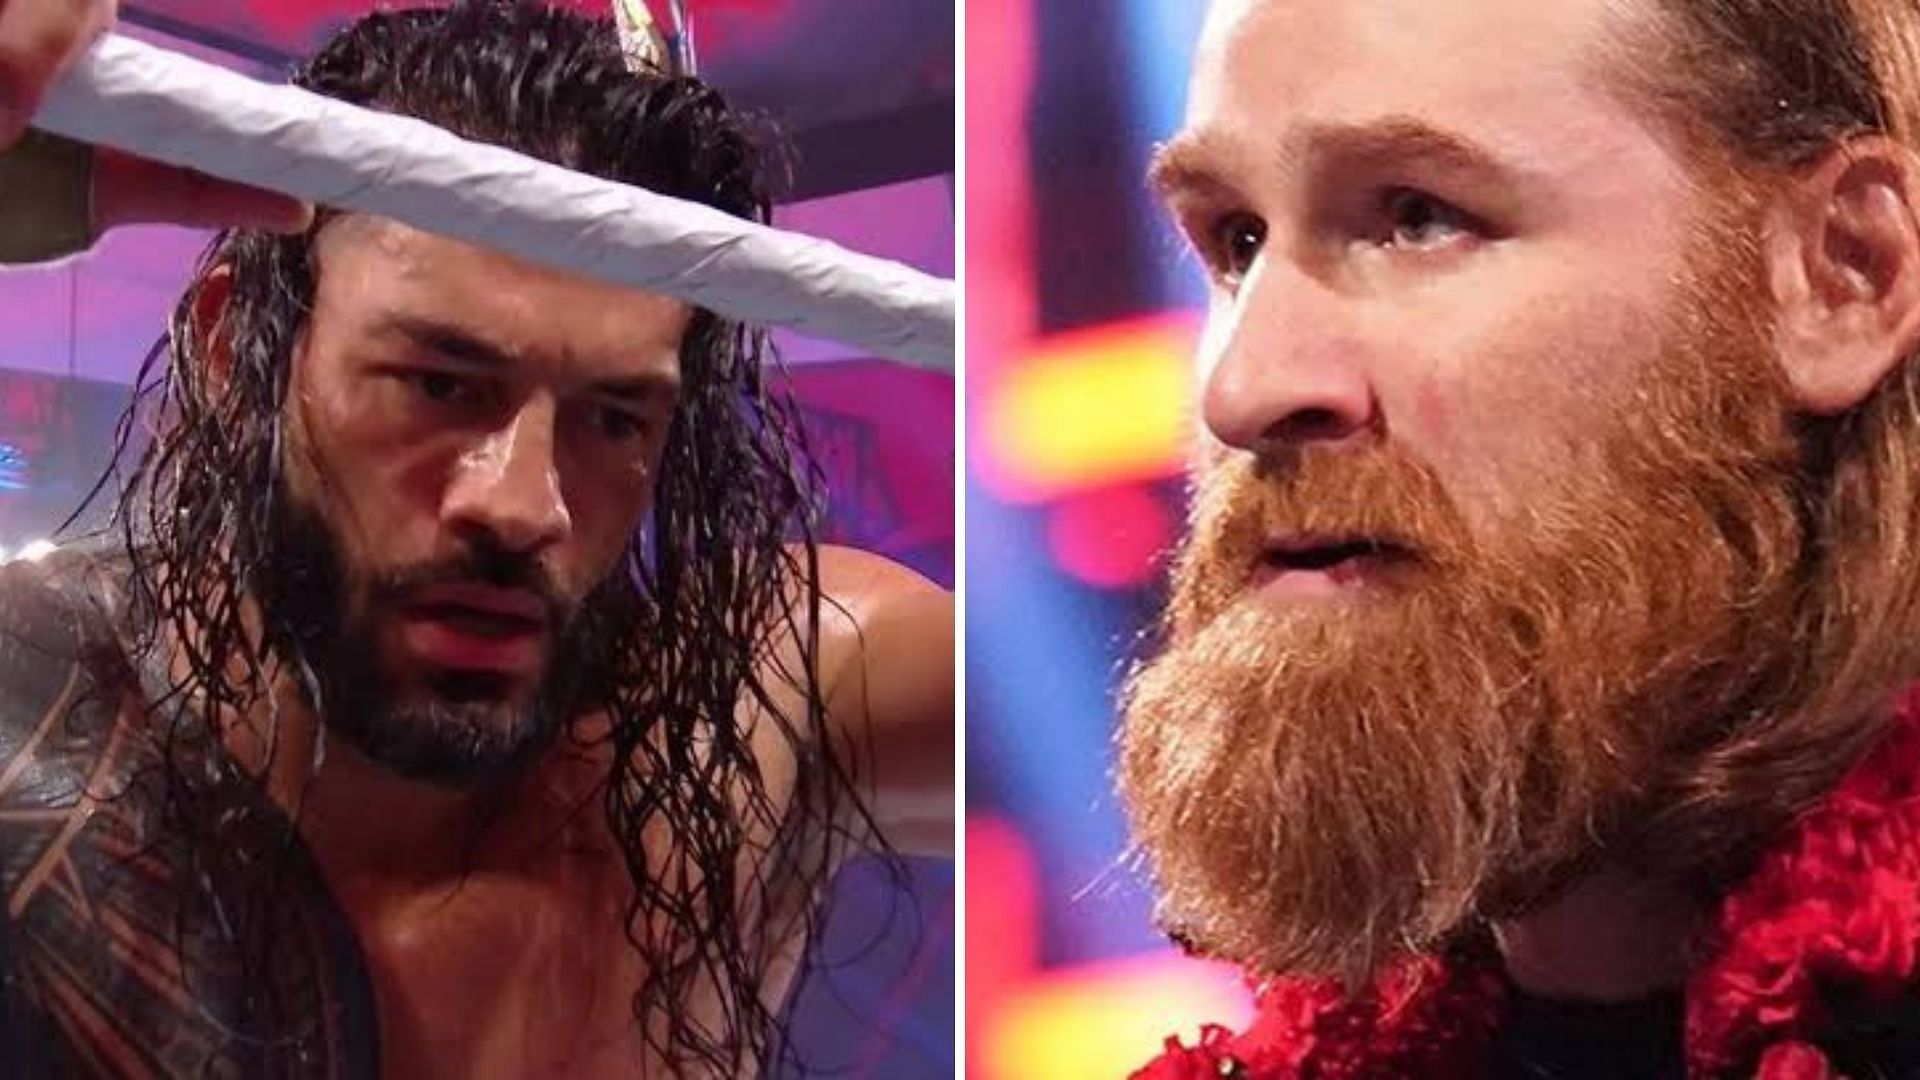 Roman Reigns will go to war with Sami Zayn at Elimination Chamber